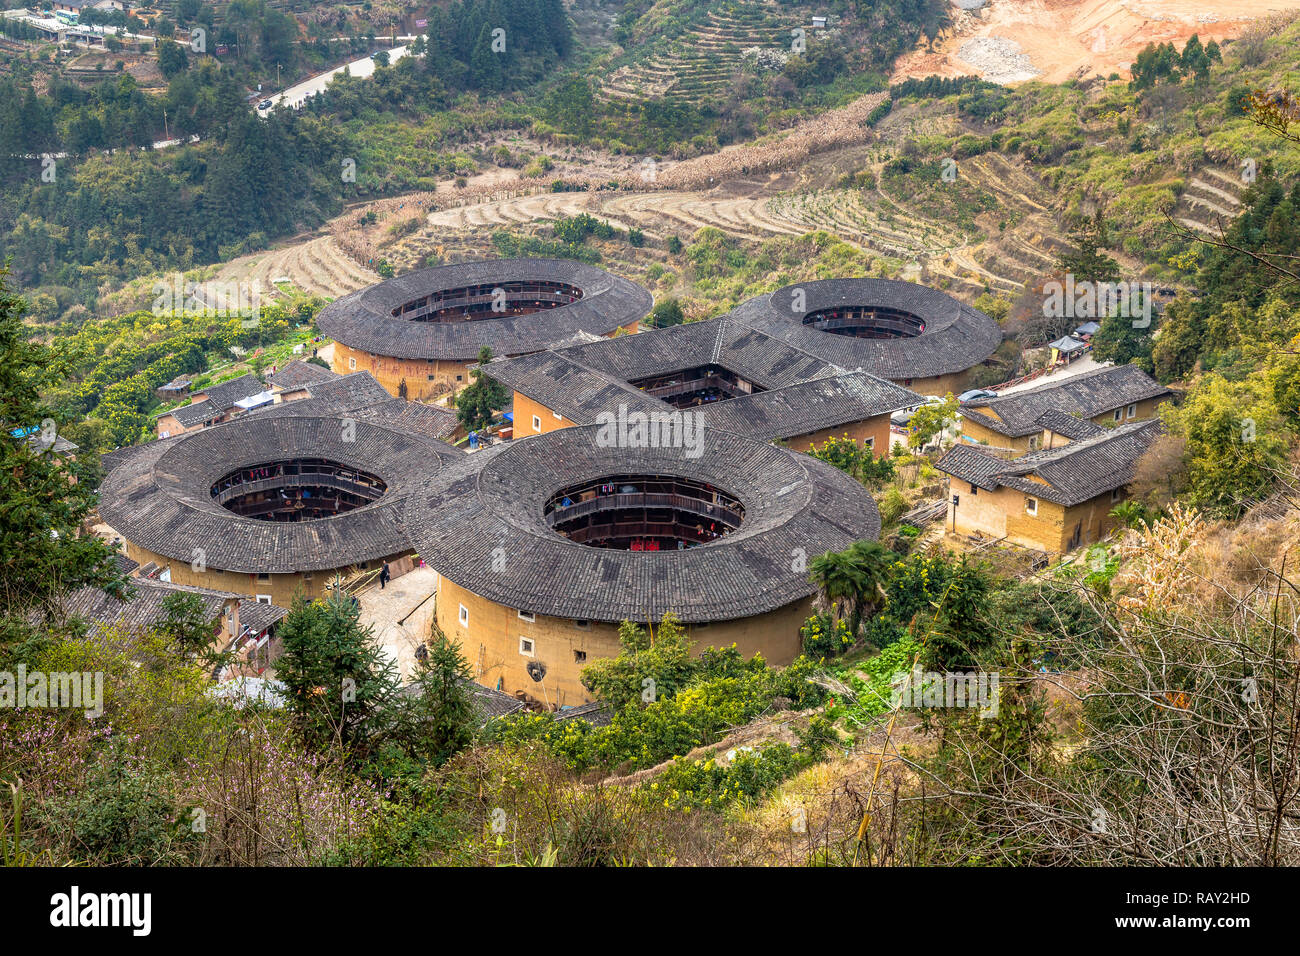 TianlouKeng cluster - Fujian province, China. The tulou are ancient earth dwellings of the Hakka people Stock Photo